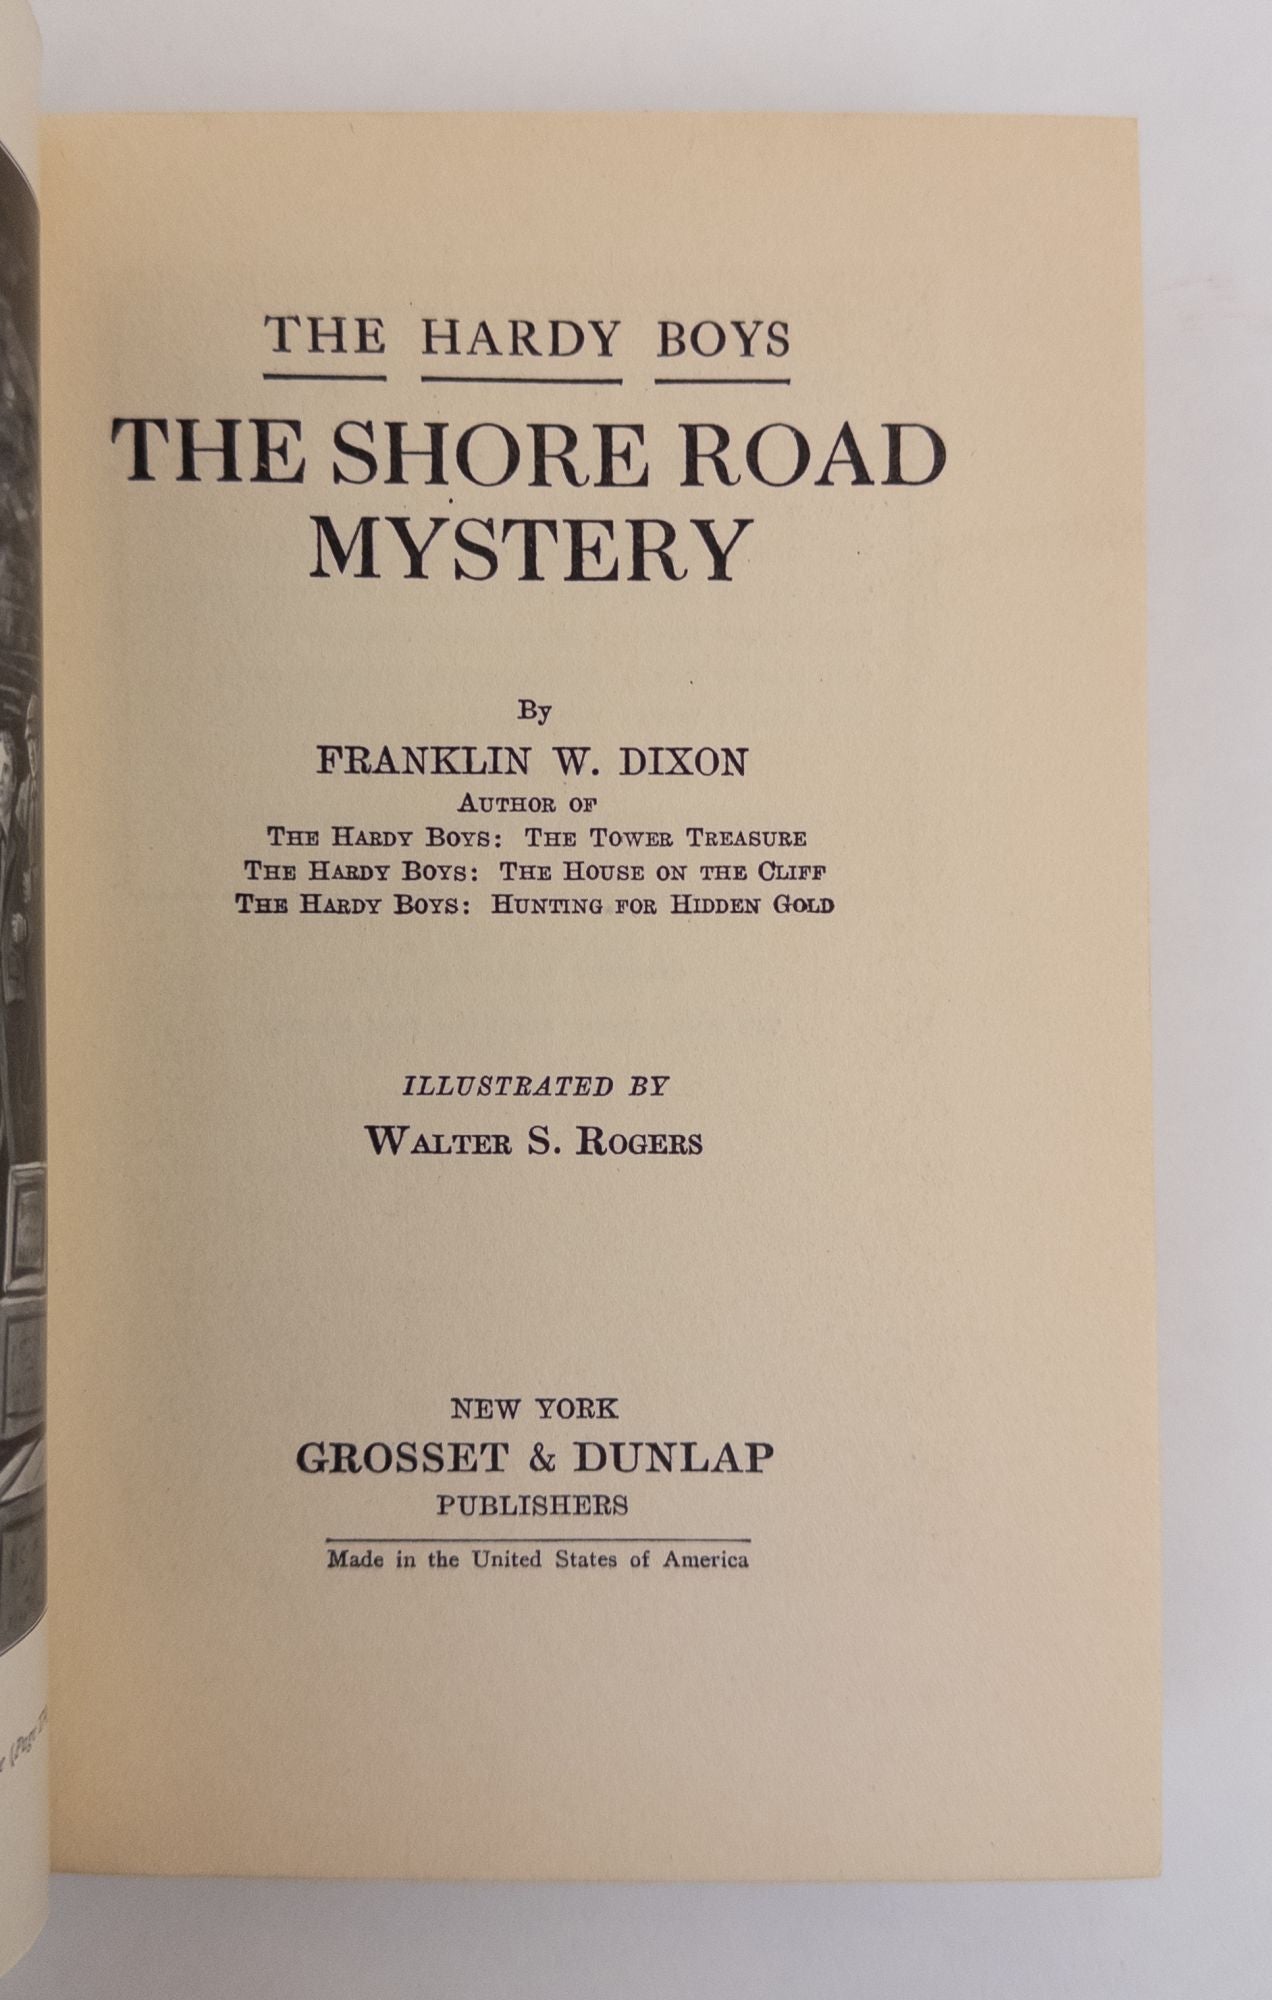 Product Image for HARDY BOYS: THE SHORE ROAD MYSTERY